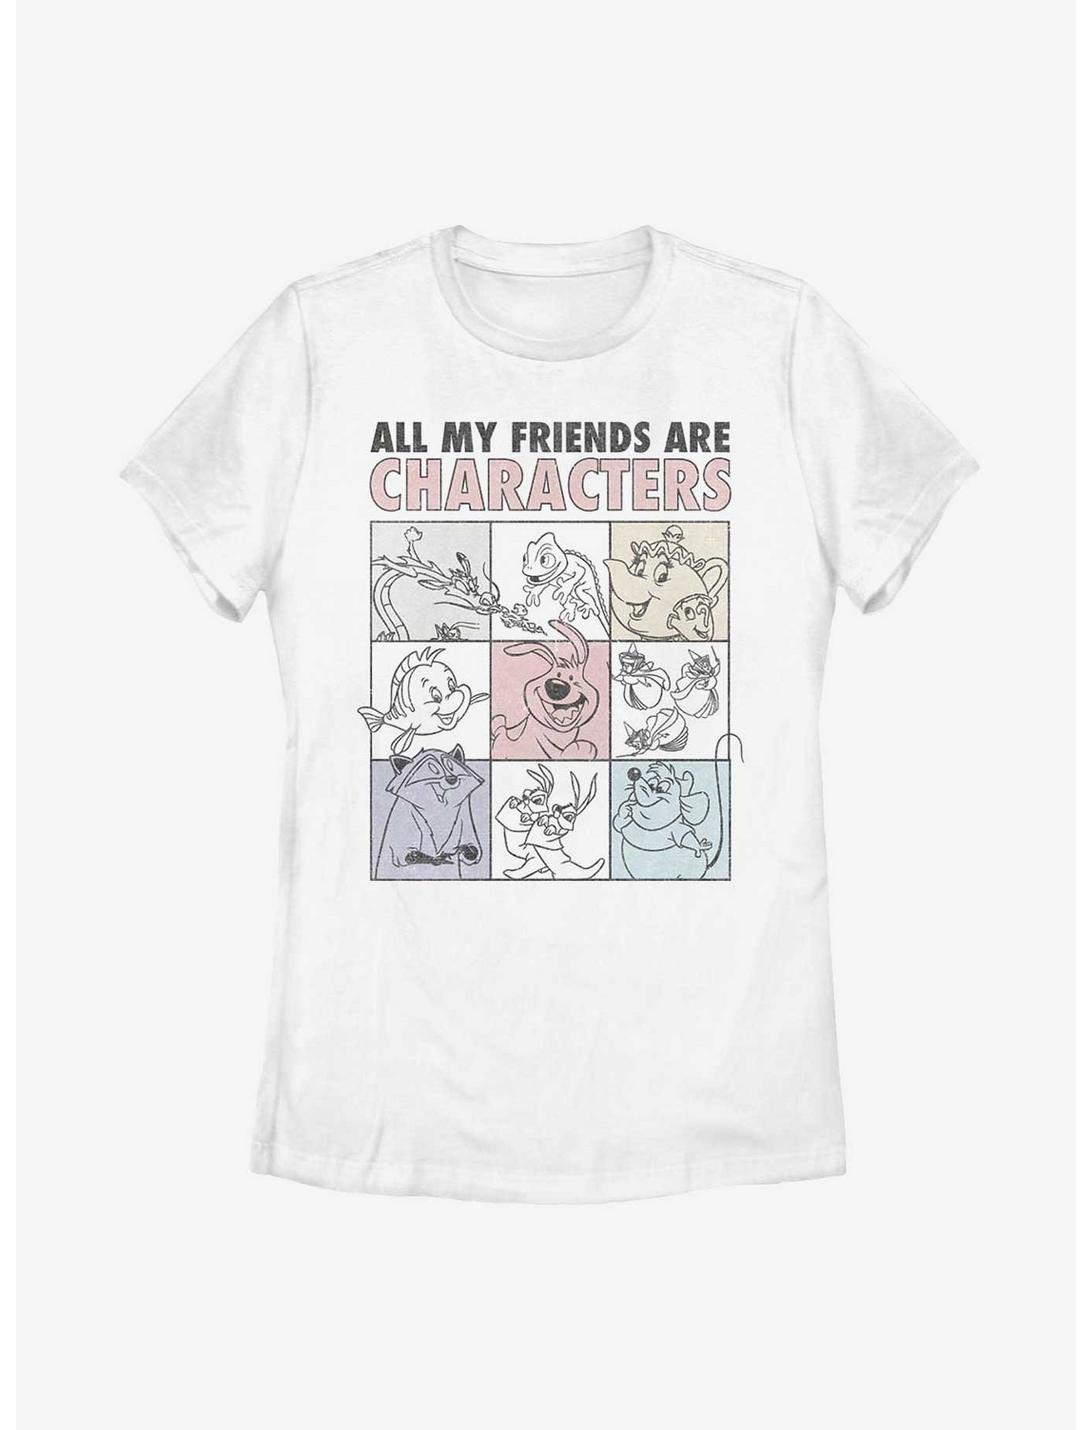 Disney Princess All My Friends Are Characters Womens T-Shirt, WHITE, hi-res